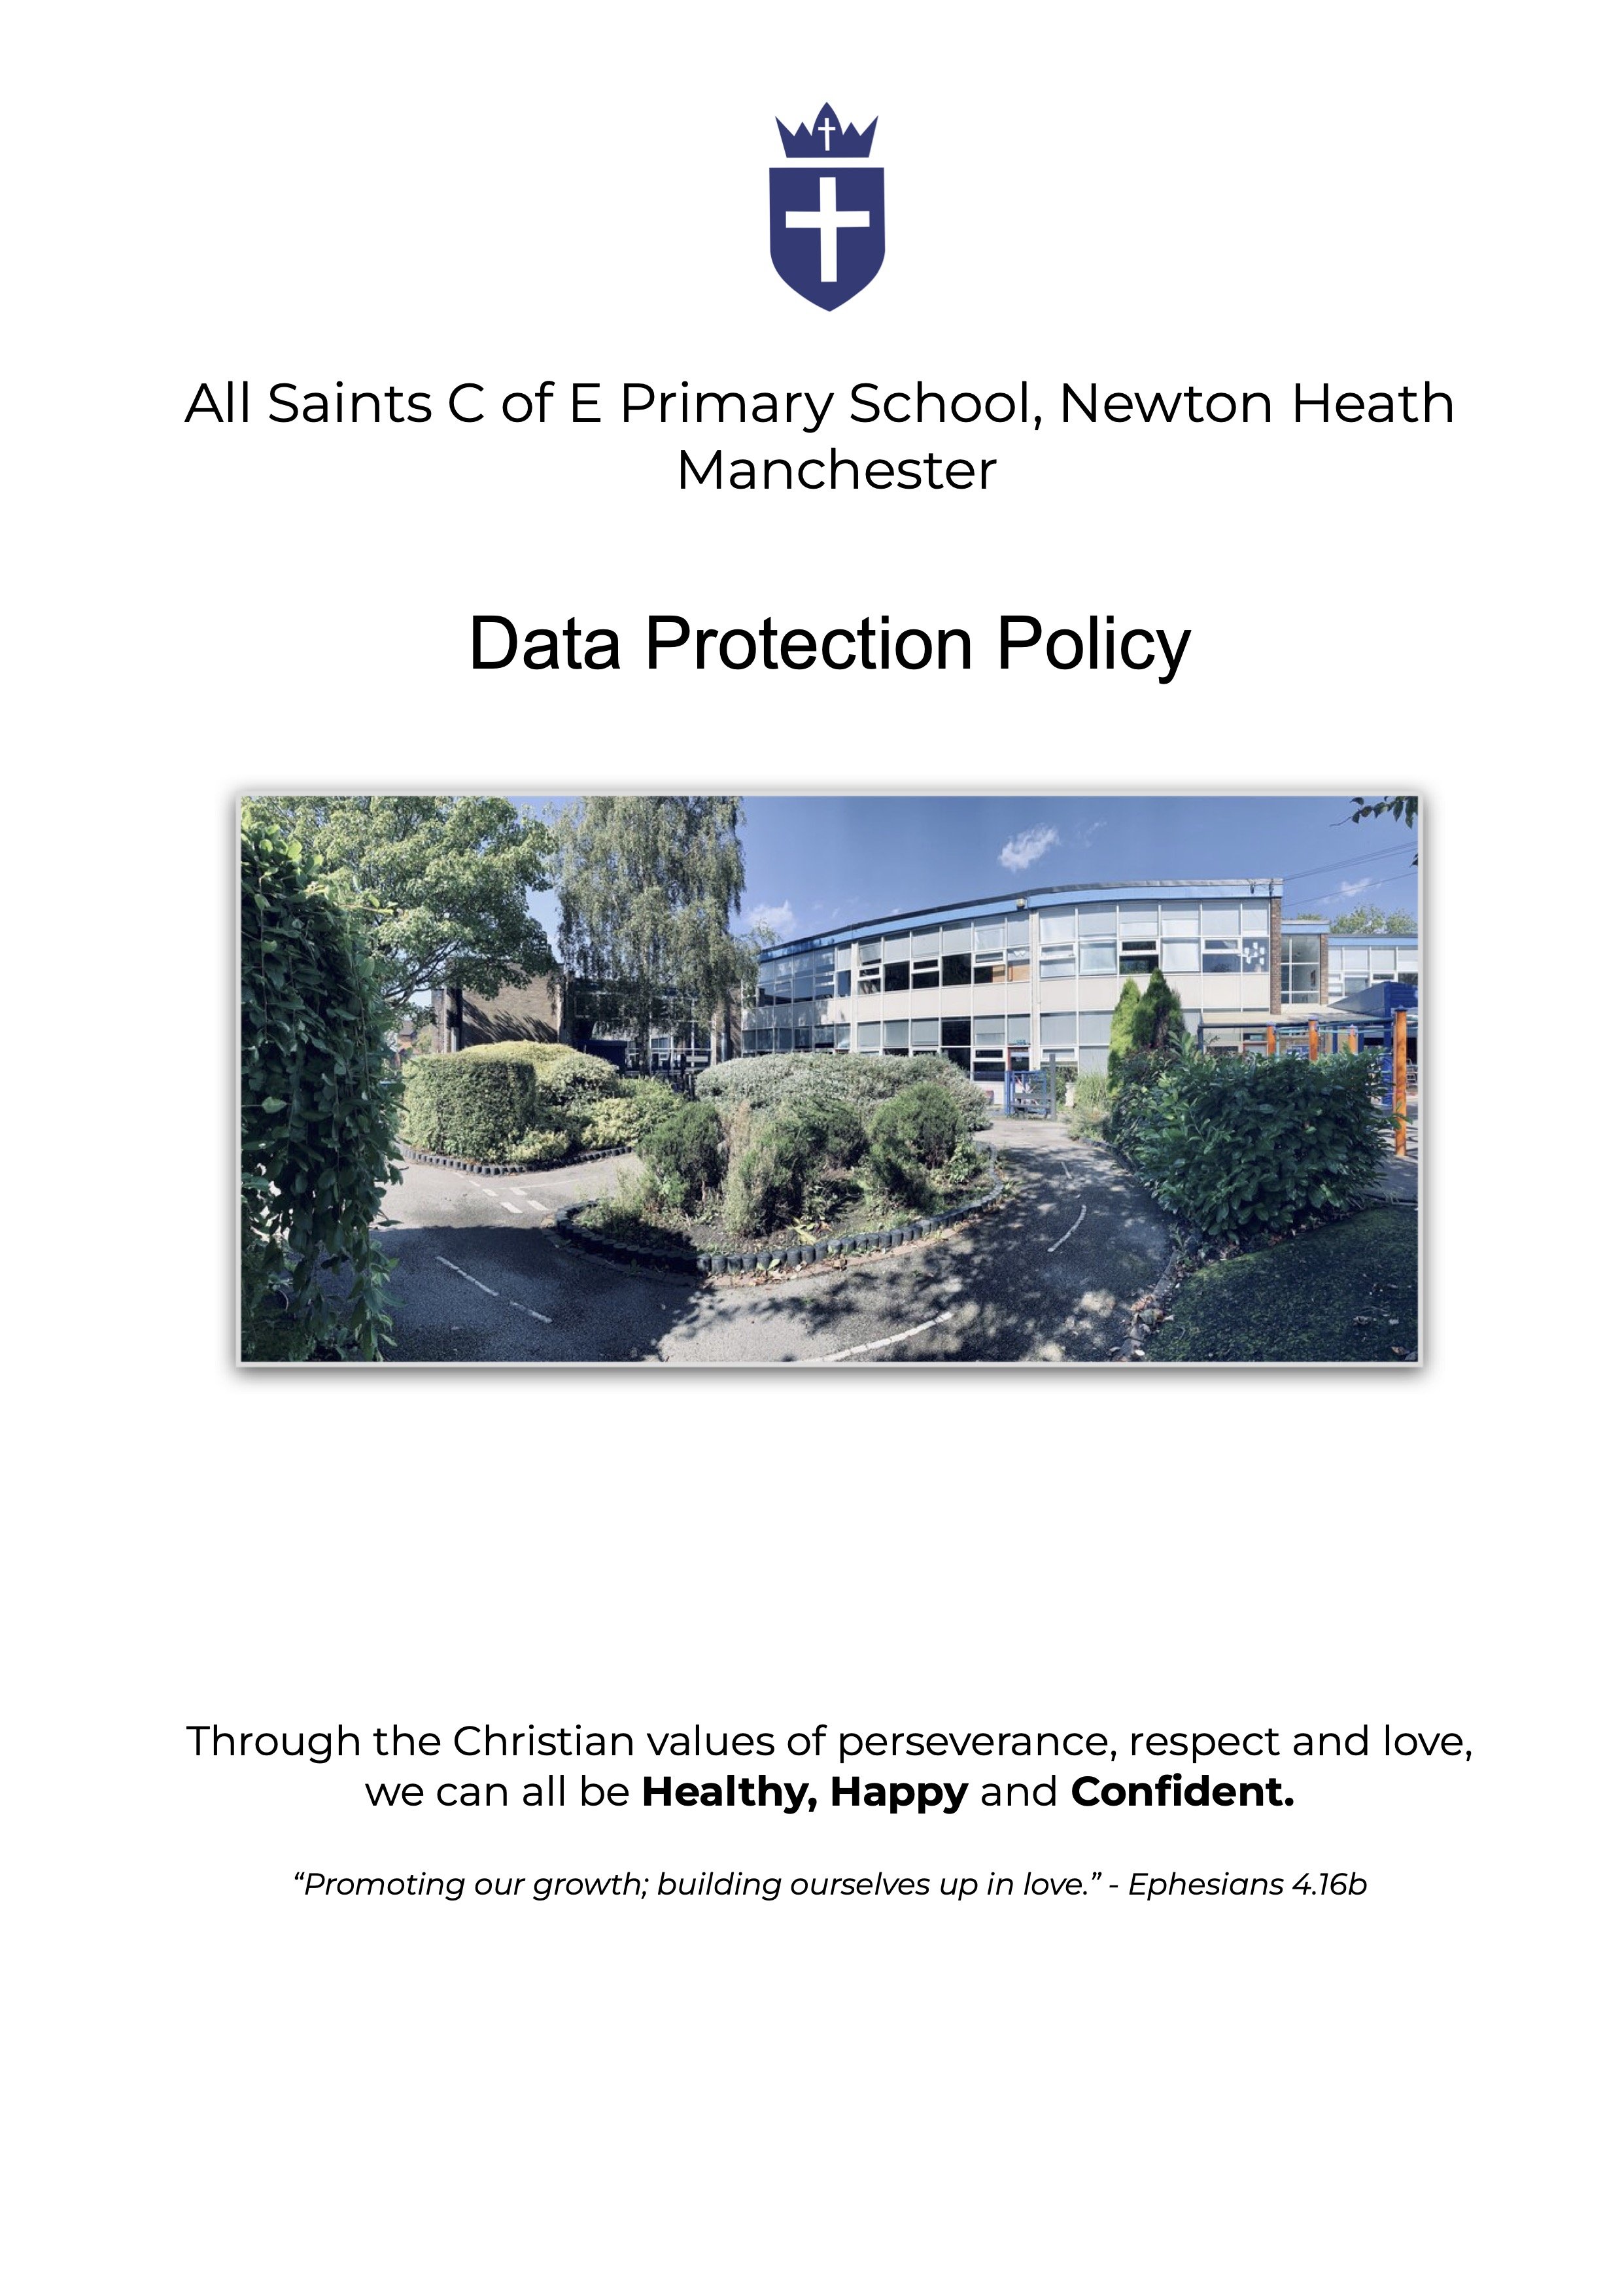 Data Protection Policy-3.jpg